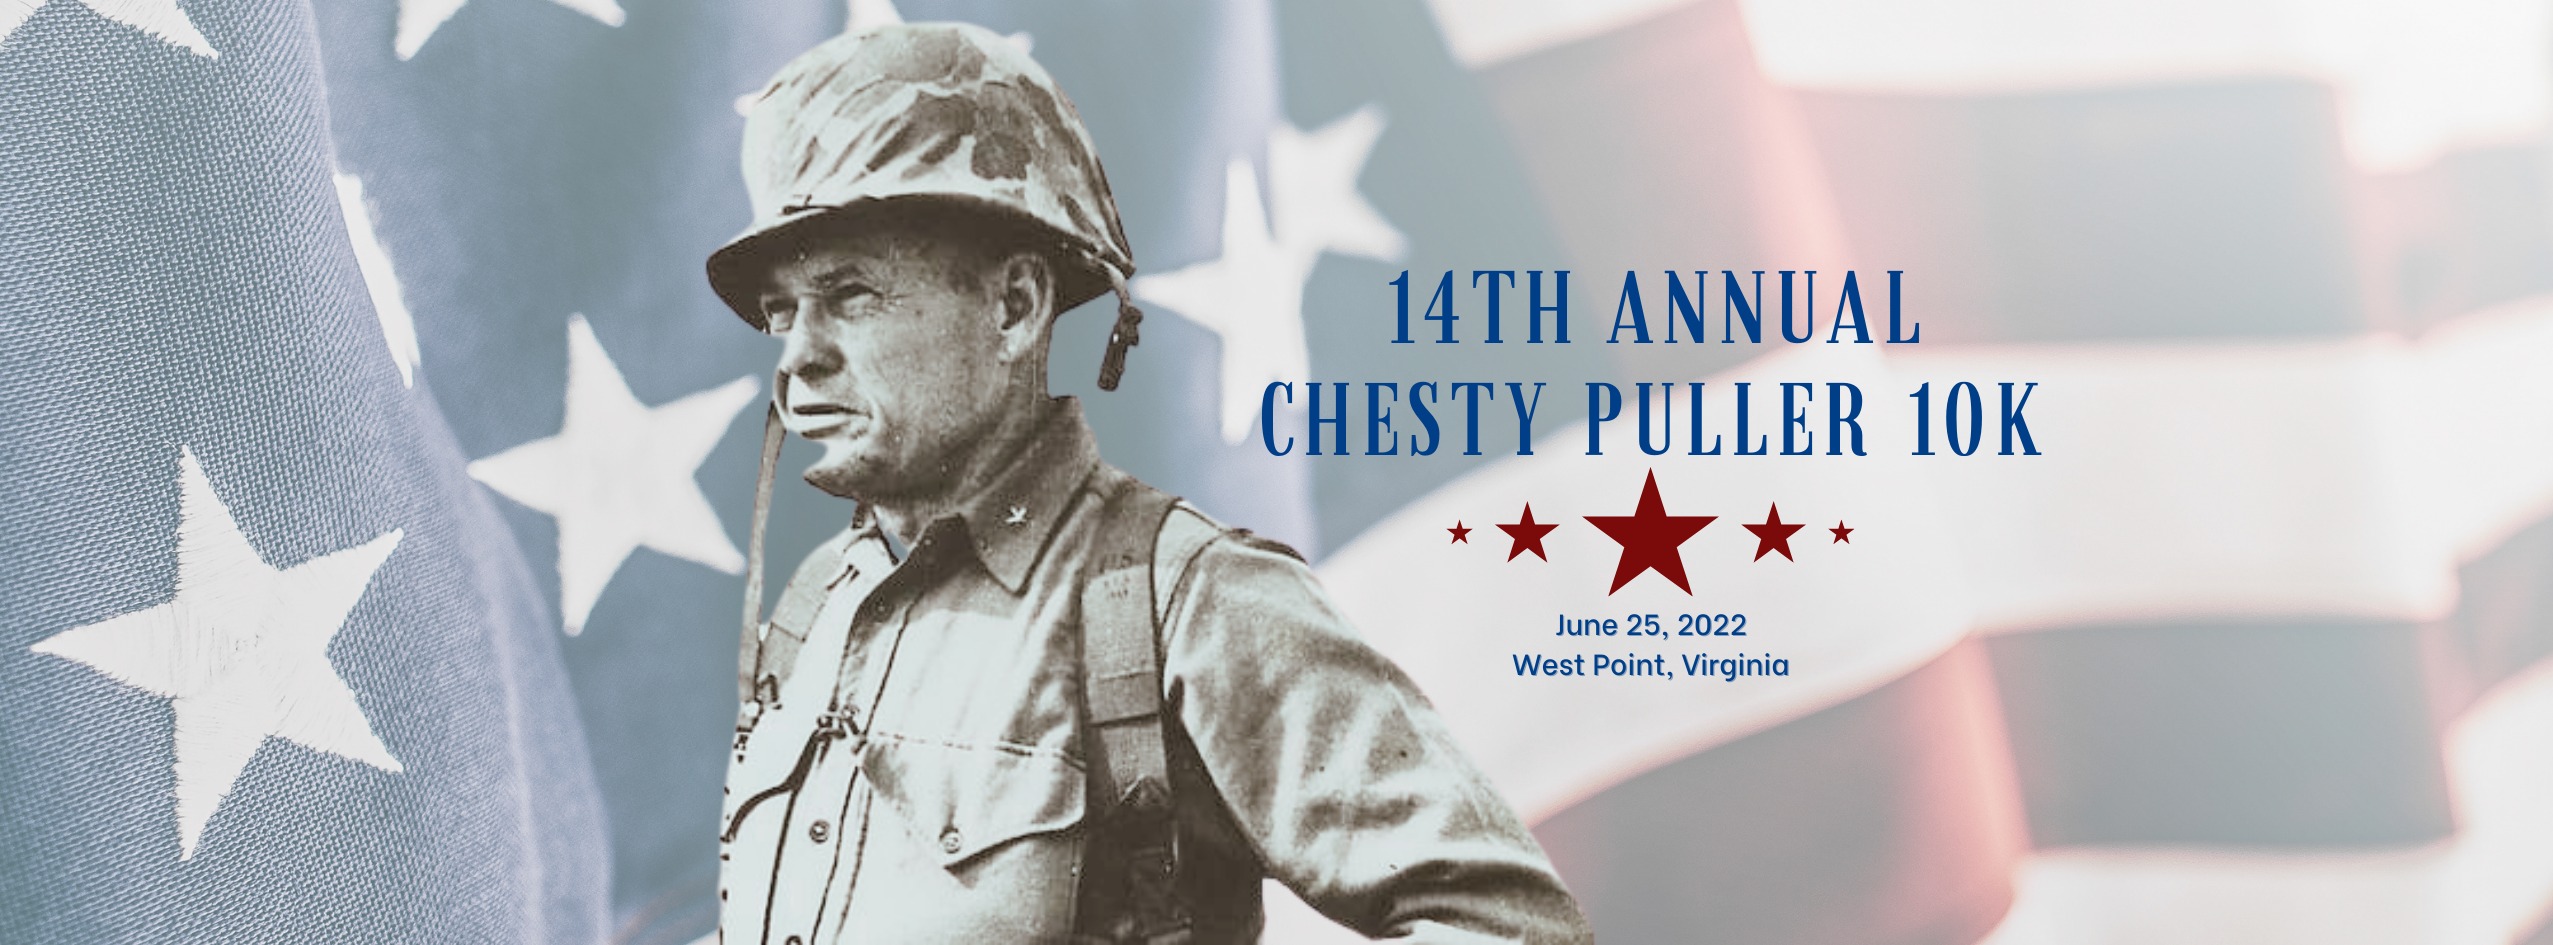 Chesty Puller 10K in West Point, Virginia